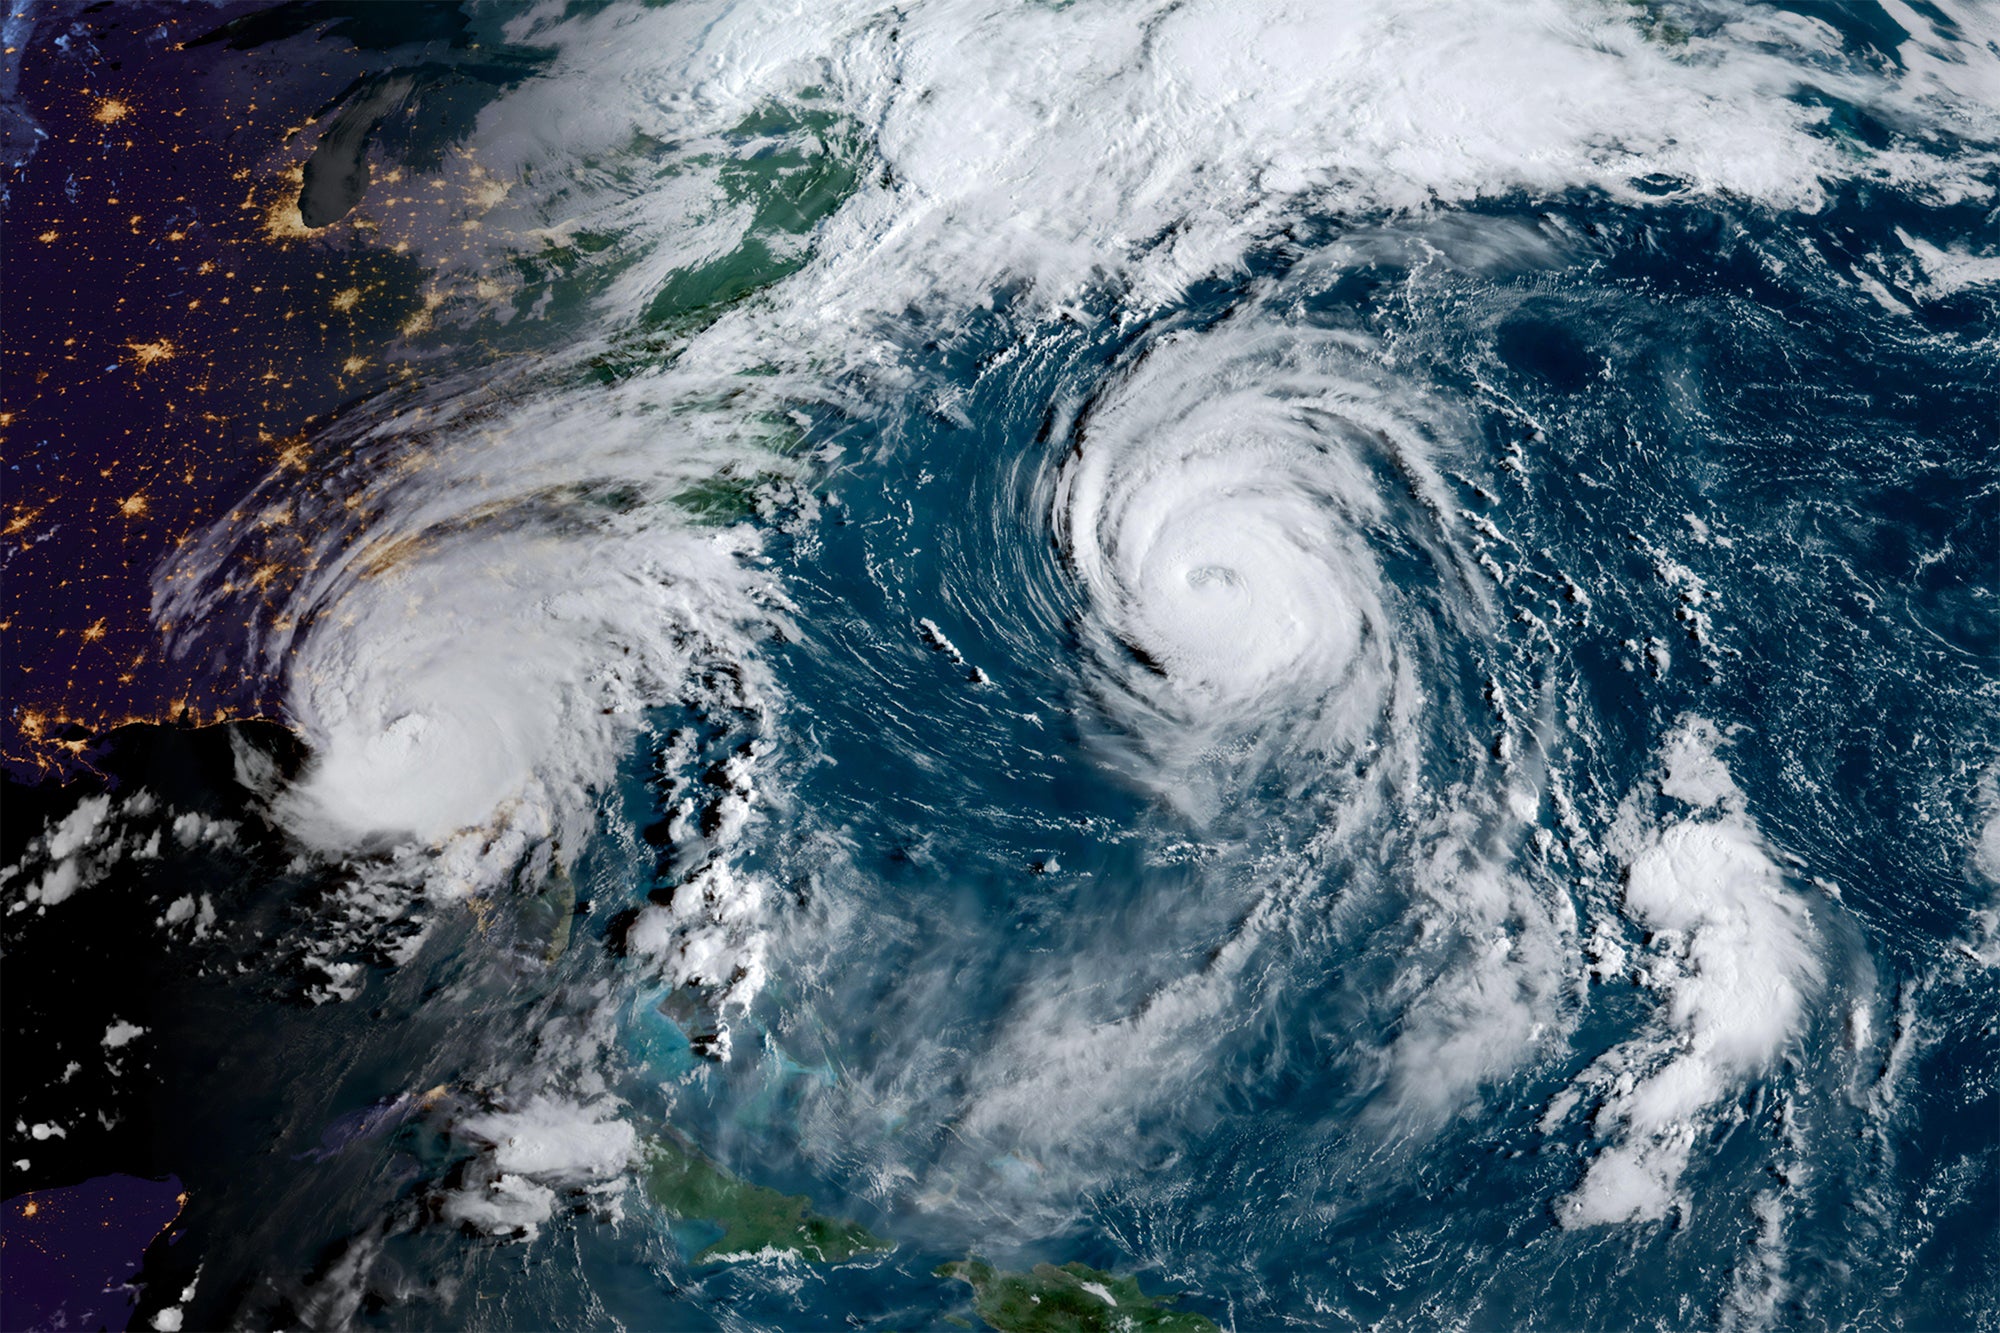 Early morning satellite image of the eastern coast of the United States and the Atlantic Ocean. Hurricane Idalia on the left makes landfall on Florida's coast and Hurricane Franklin sits over the Atlantic near Bermuda